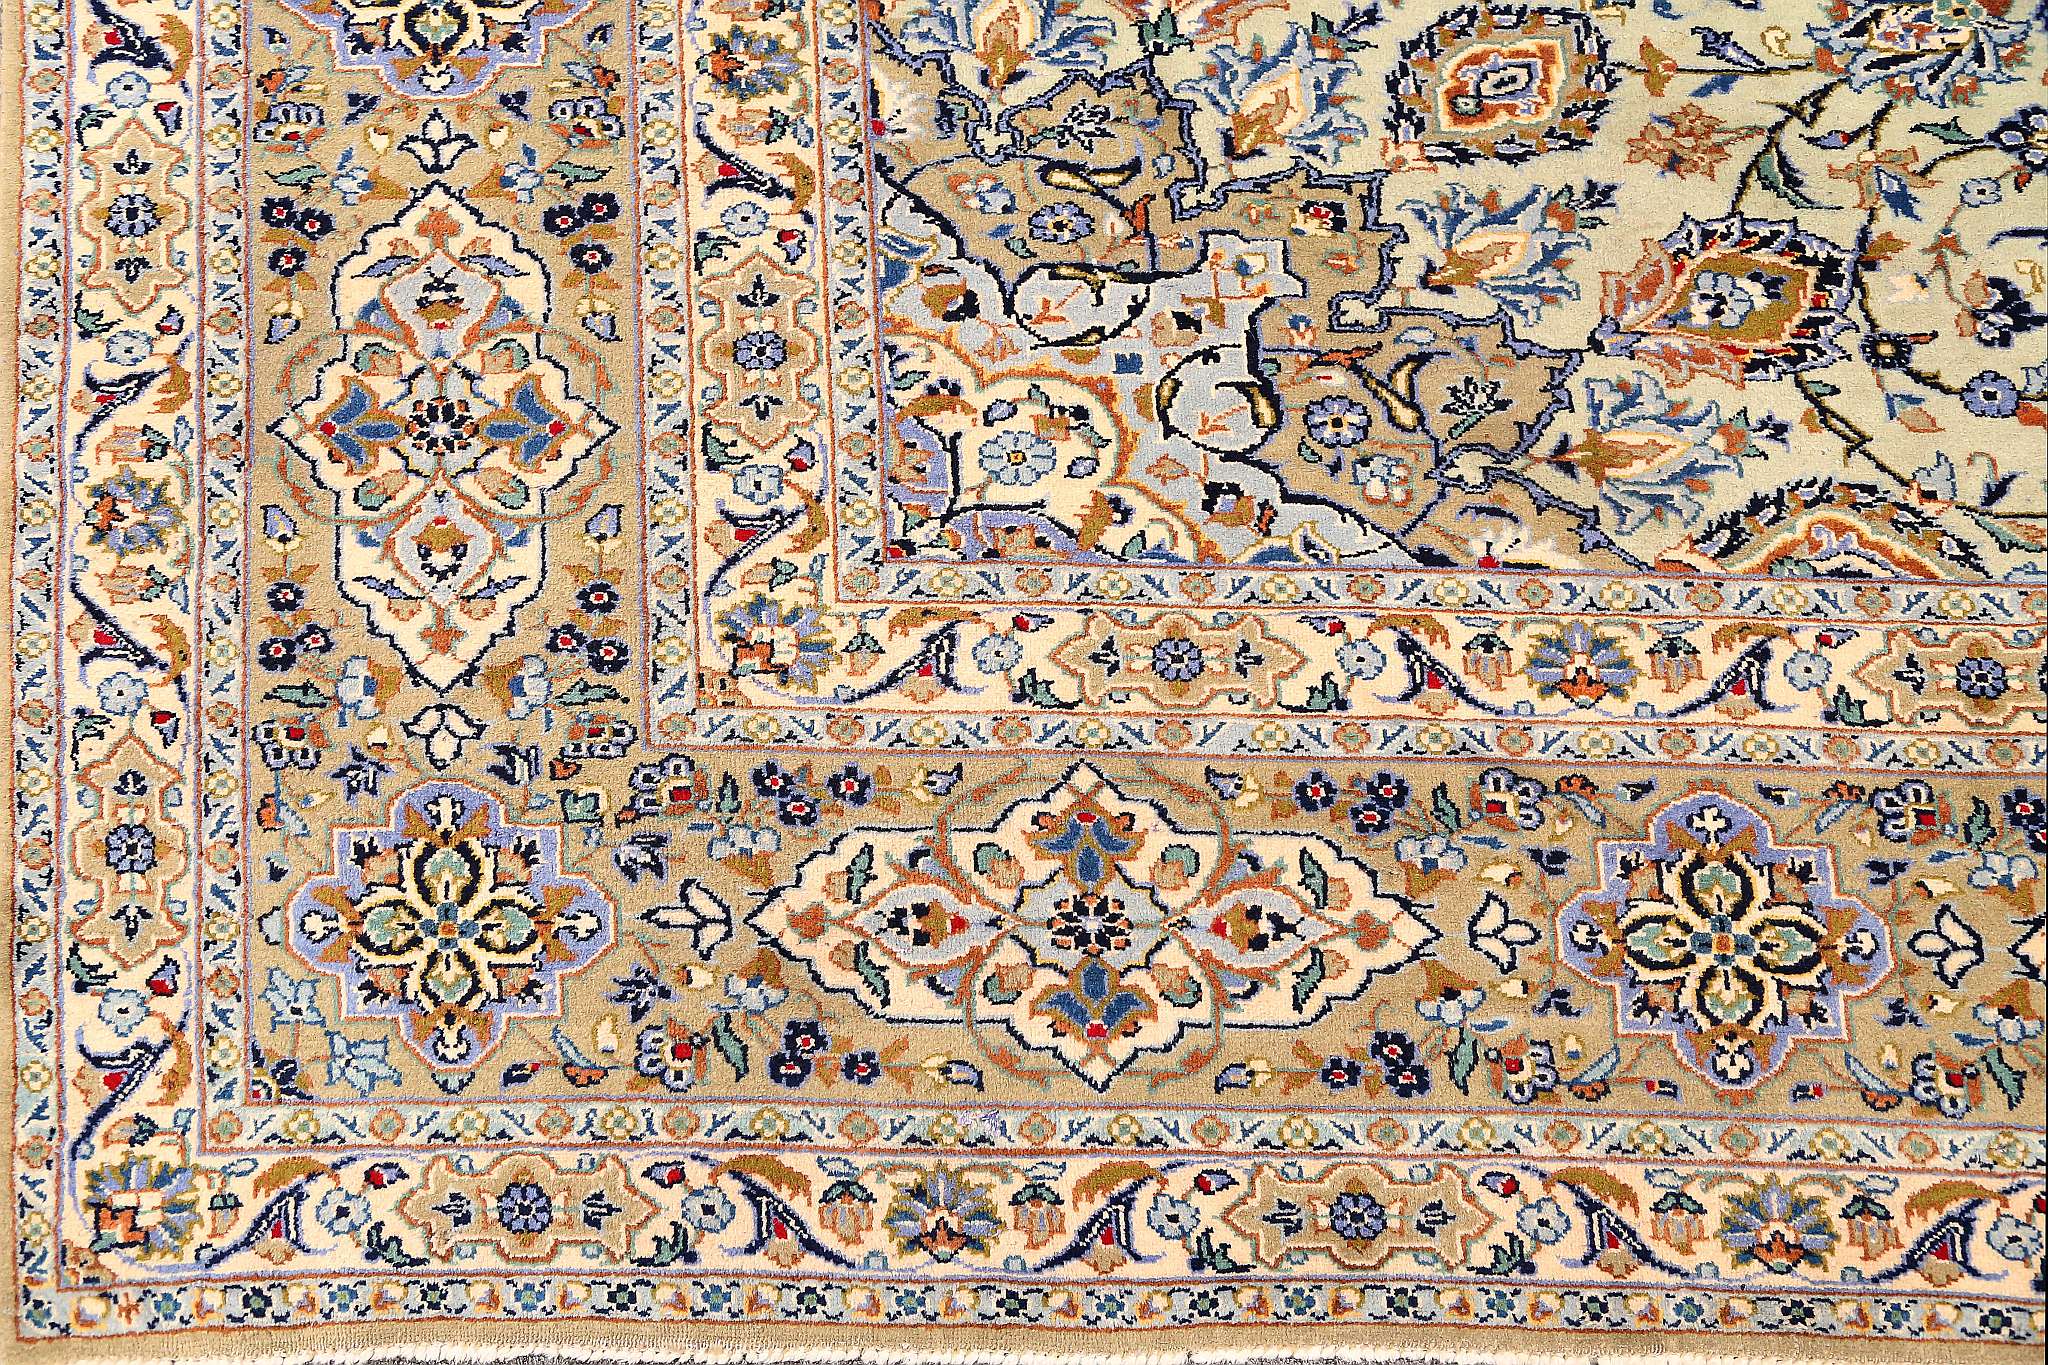 A FINE SIGNED KASHAN CARPET CENTRAL PERSIA, CIRCA 1950 approx: 12ft.2in. x 9ft.2in.(370cm. x 279cm.) - Image 2 of 5